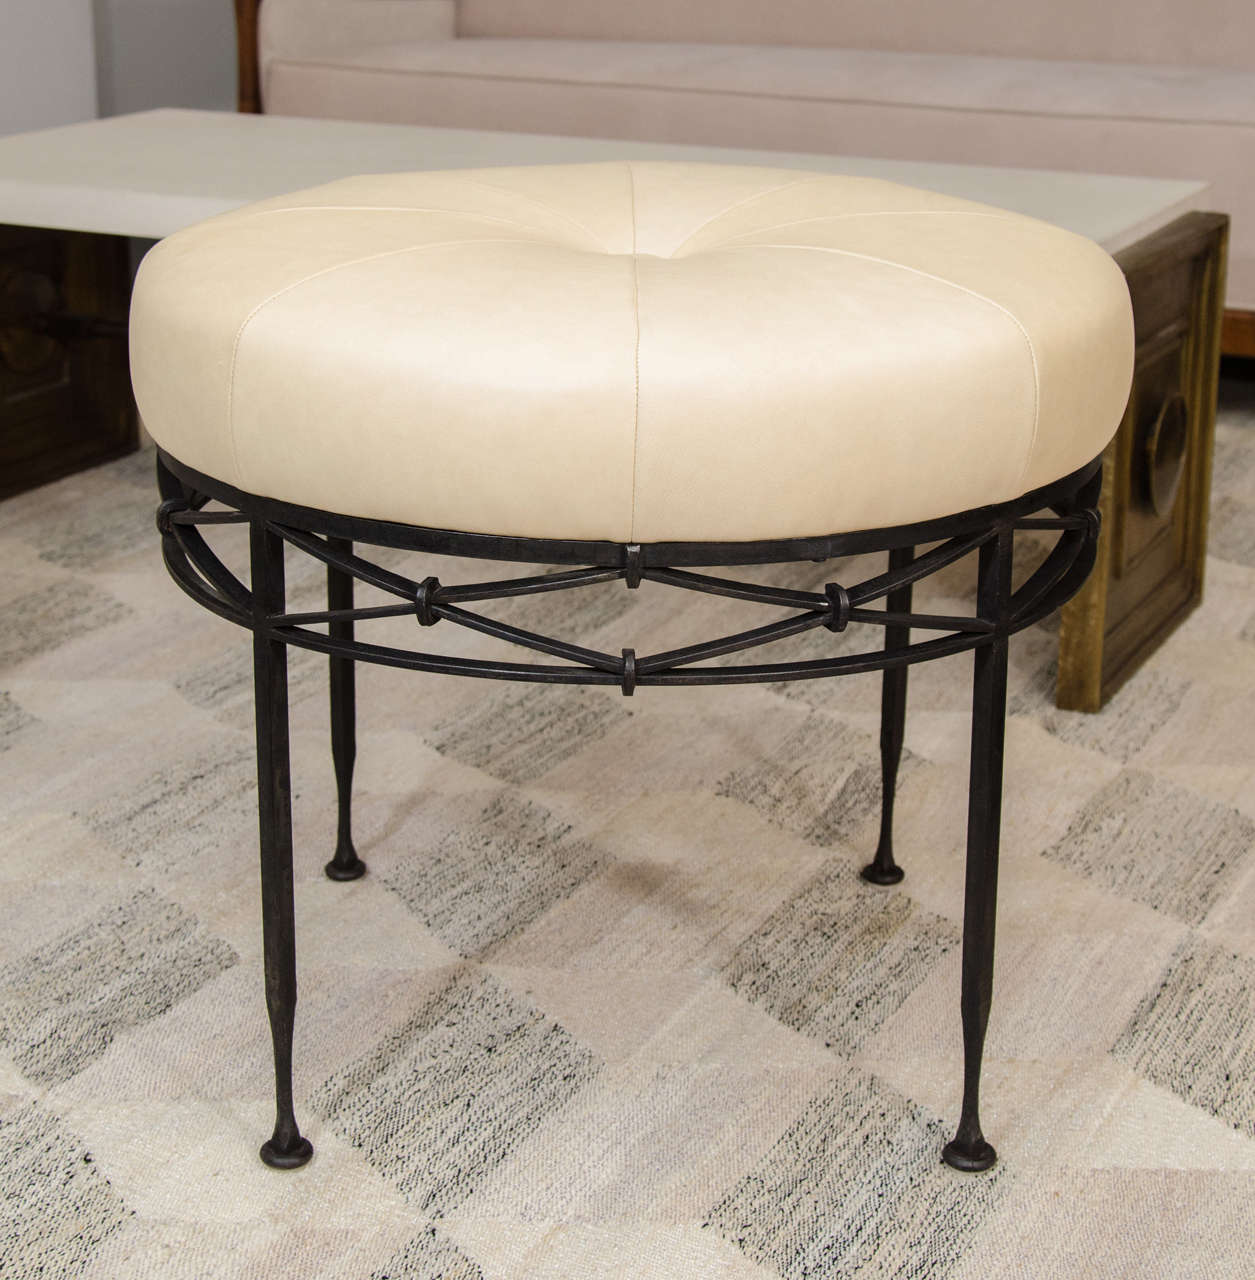 Beautifully crafted wrought iron base with newly upholstered leather seat.